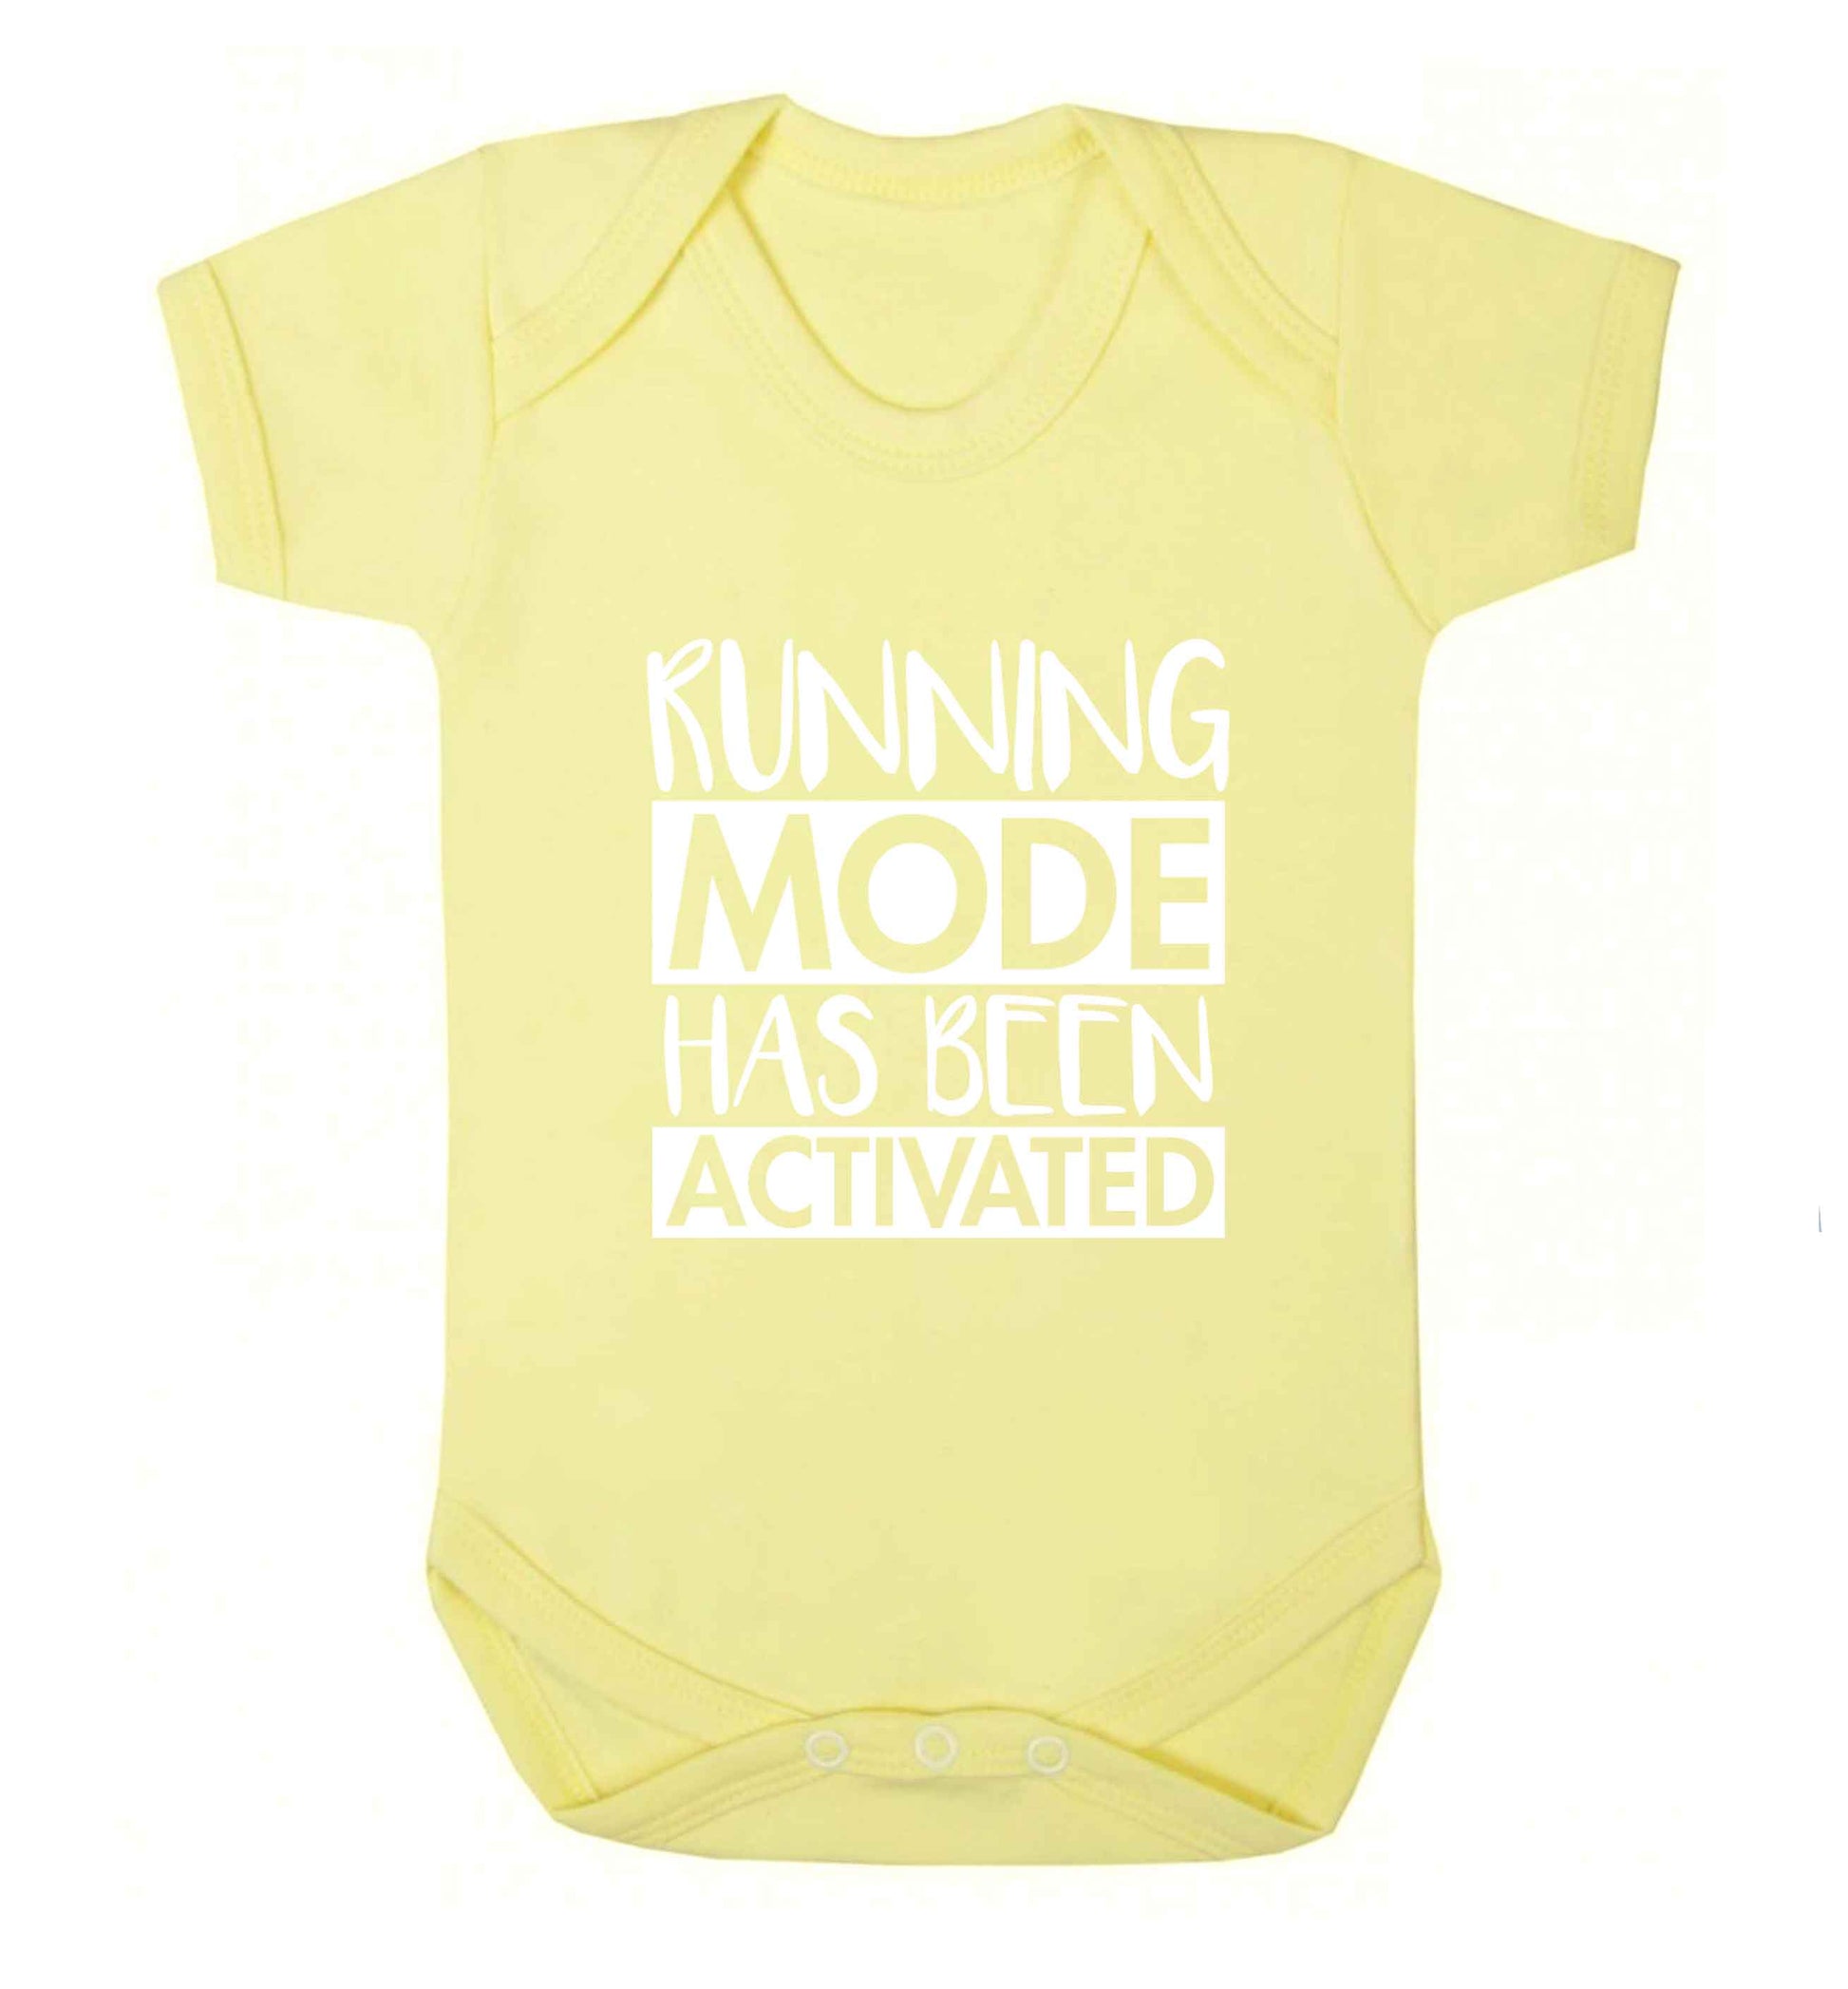 Running mode has been activated baby vest pale yellow 18-24 months